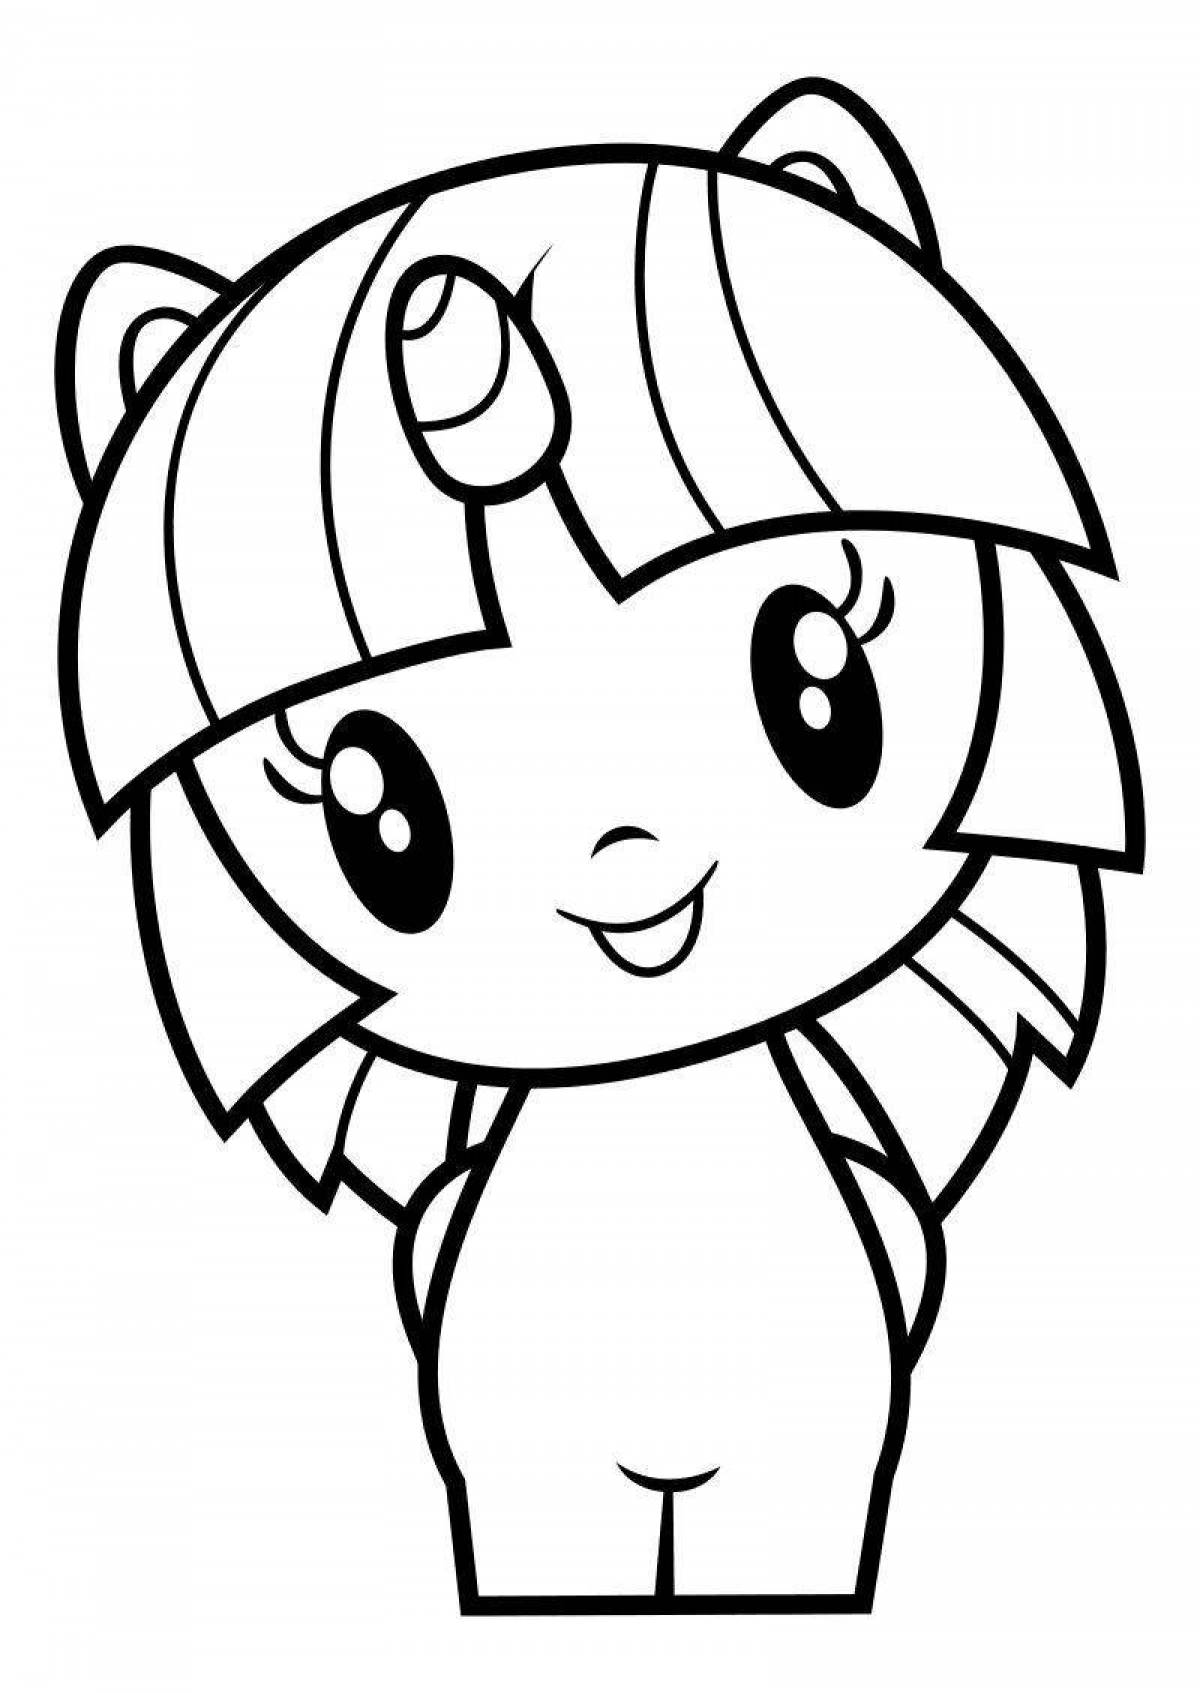 Exciting mini pony coloring book